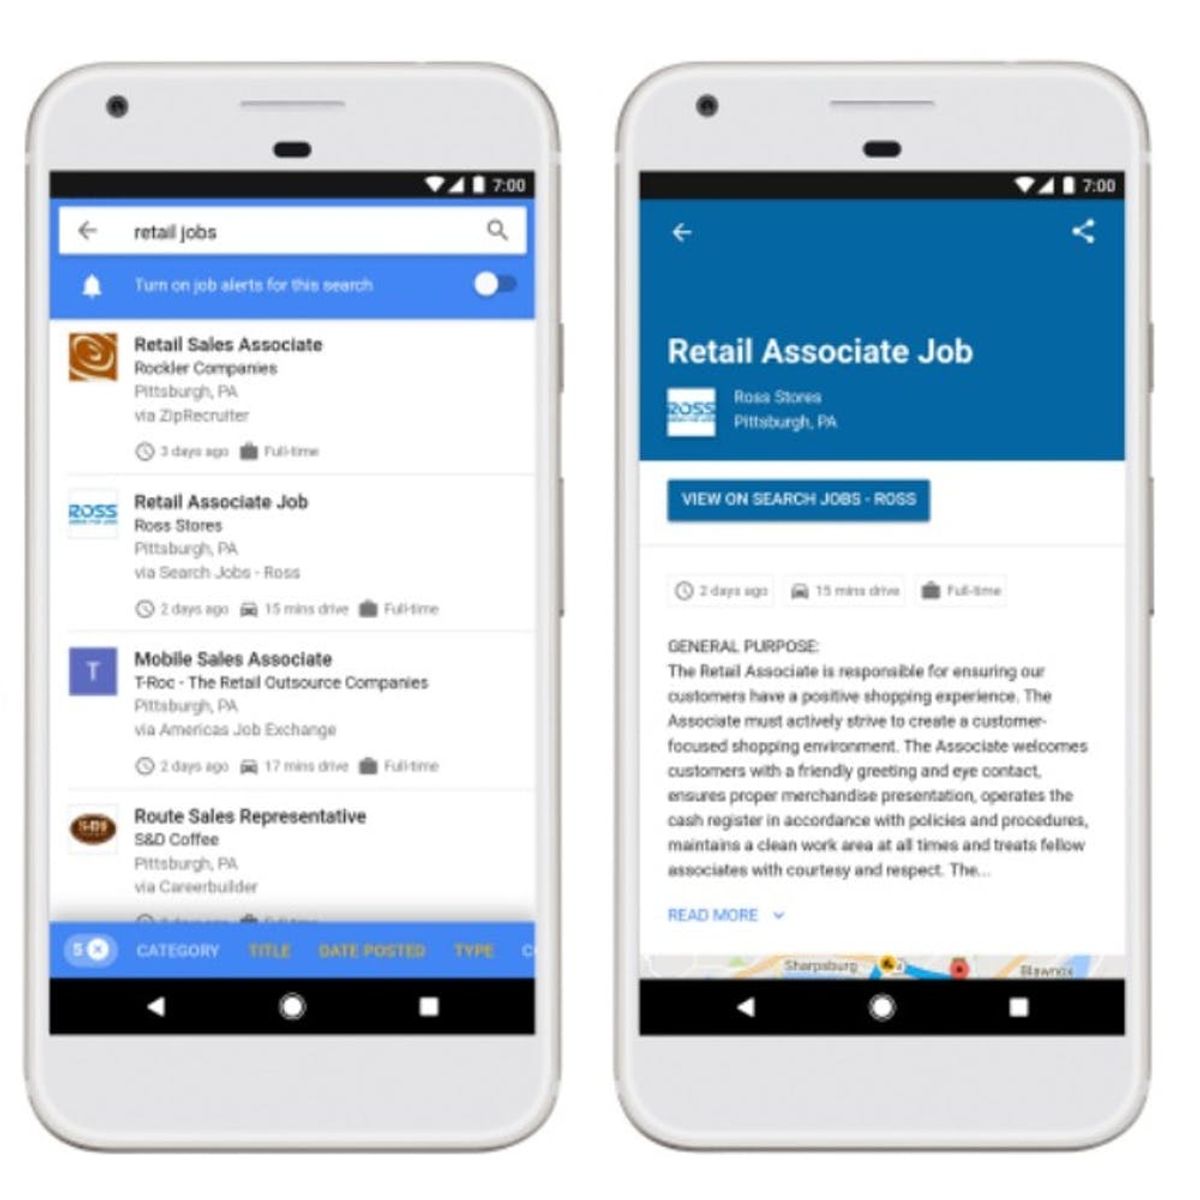 This New Google Feature Makes Job-Hunting a Breeze